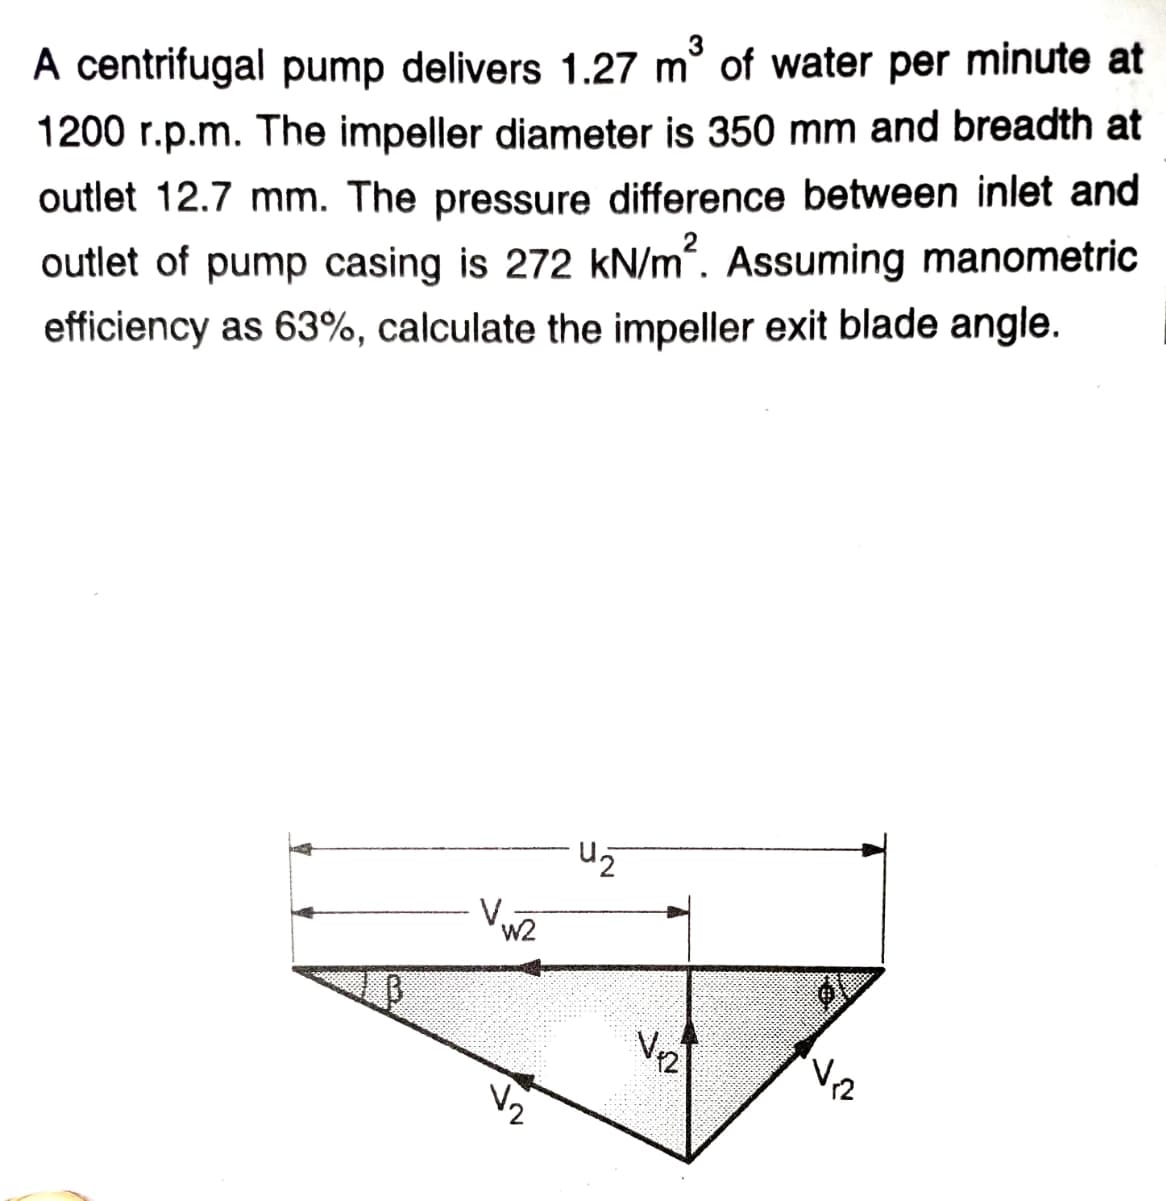 A centrifugal pump delivers 1.27 m° of water per minute at
1200 r.p.m. The impeller diameter is 350 mm and breadth at
outlet 12.7 mm. The pressure difference between inlet and
outlet of pump casing is 272 kN/m. Assuming manometric
efficiency as 63%, calculate the impeller exit blade angle.
